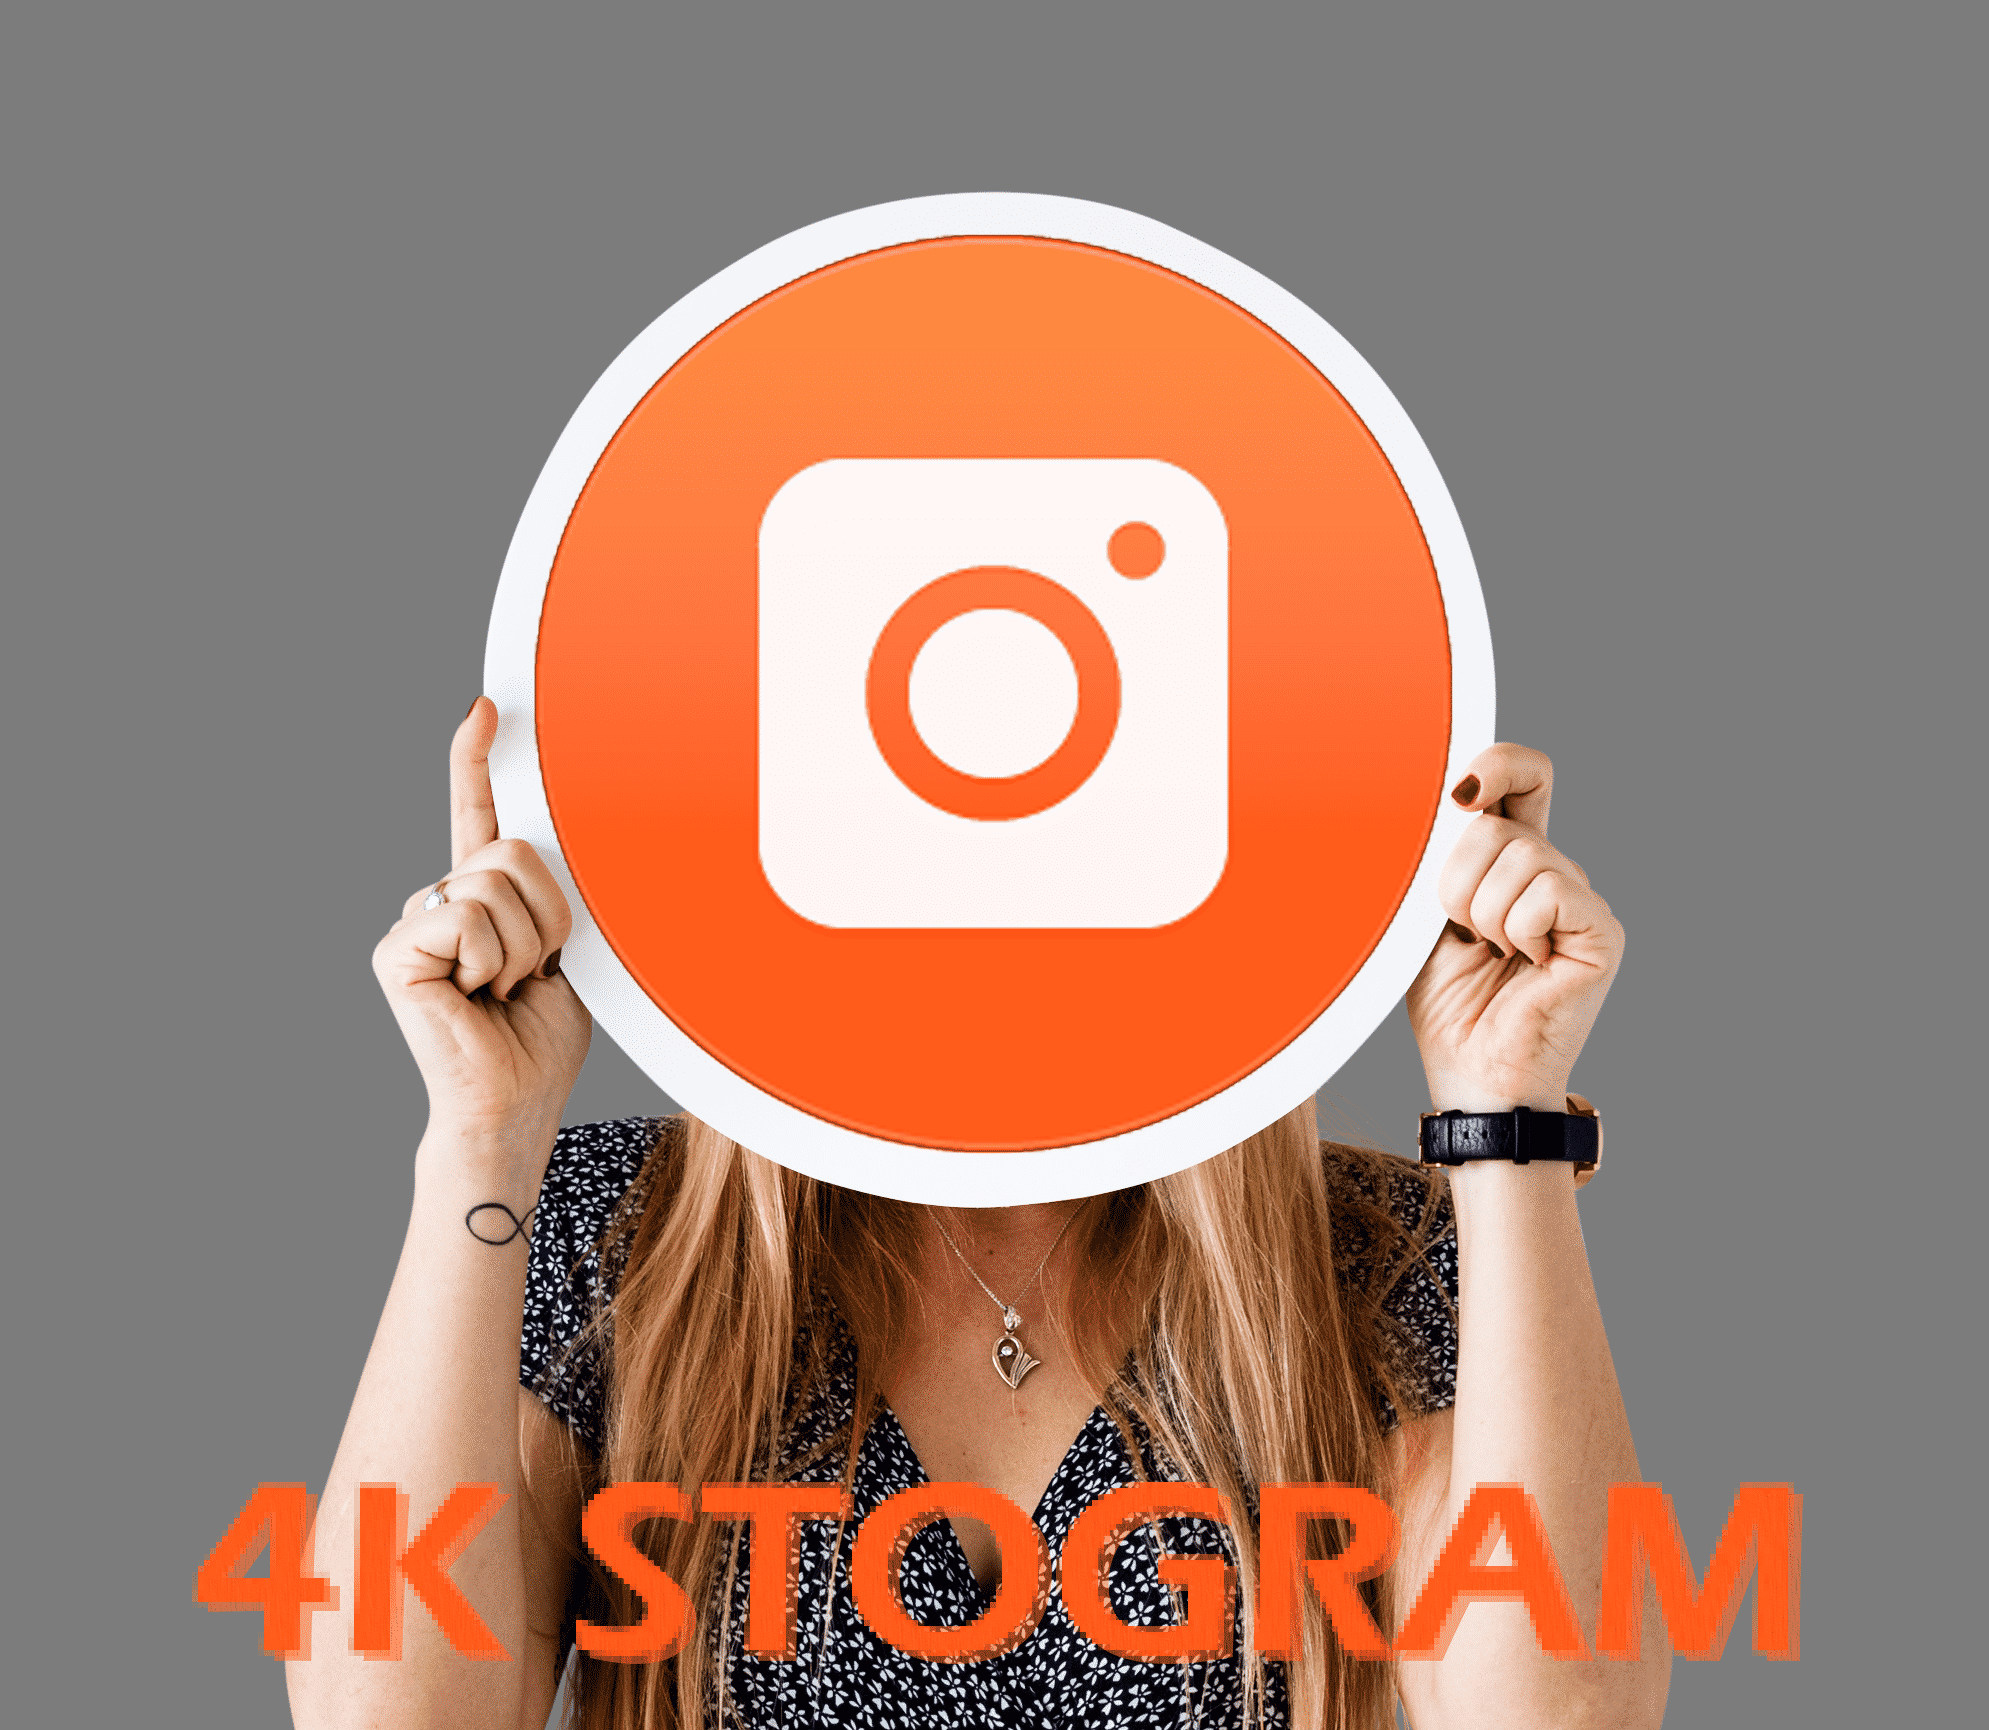 for iphone download 4K Stogram 4.6.3.4500 free